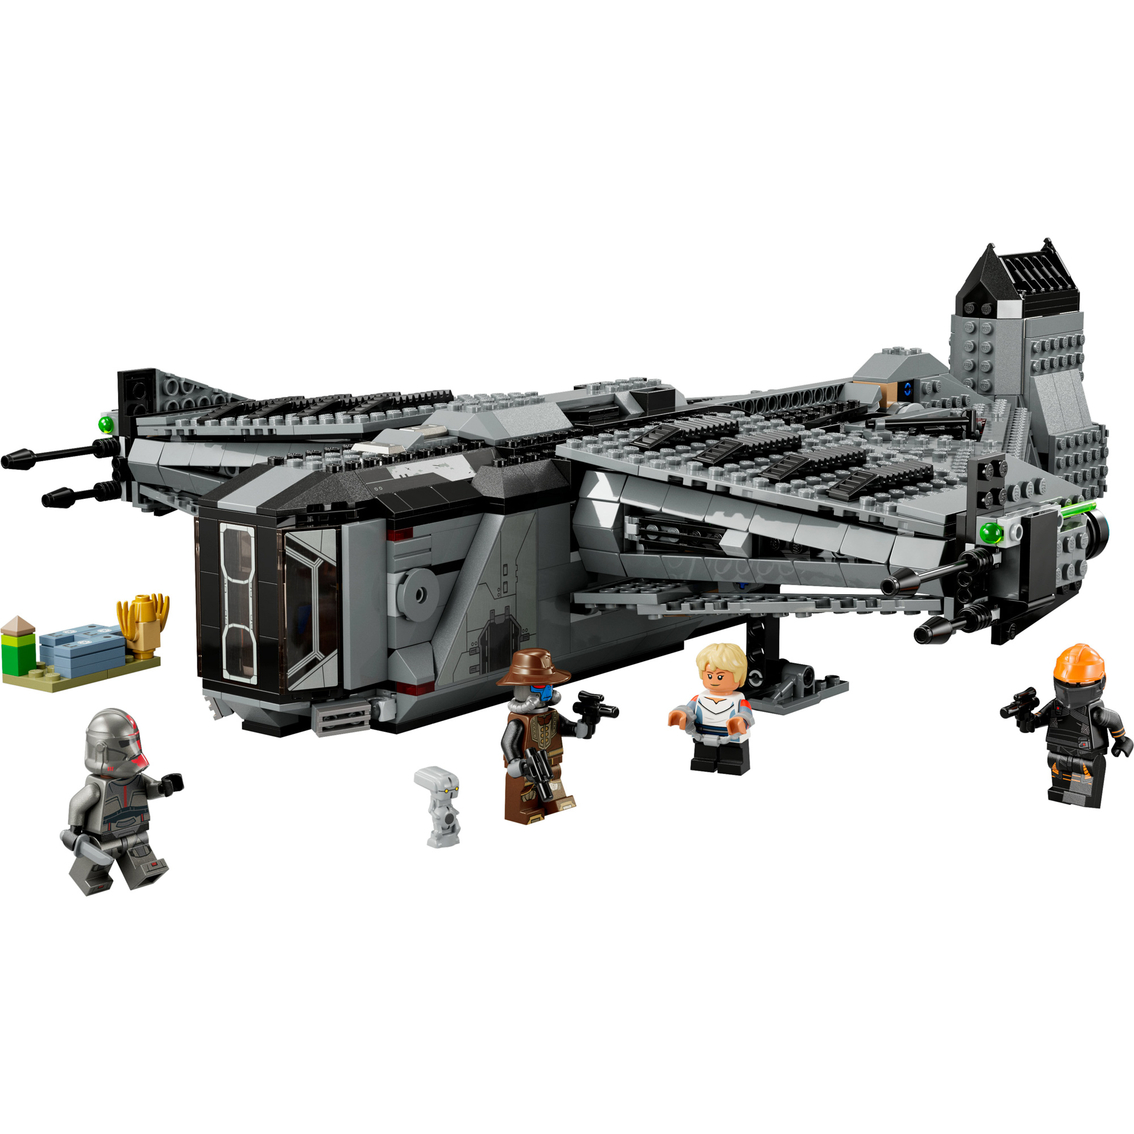 LEGO Star Wars The Justifier 75323 - Image 2 of 3